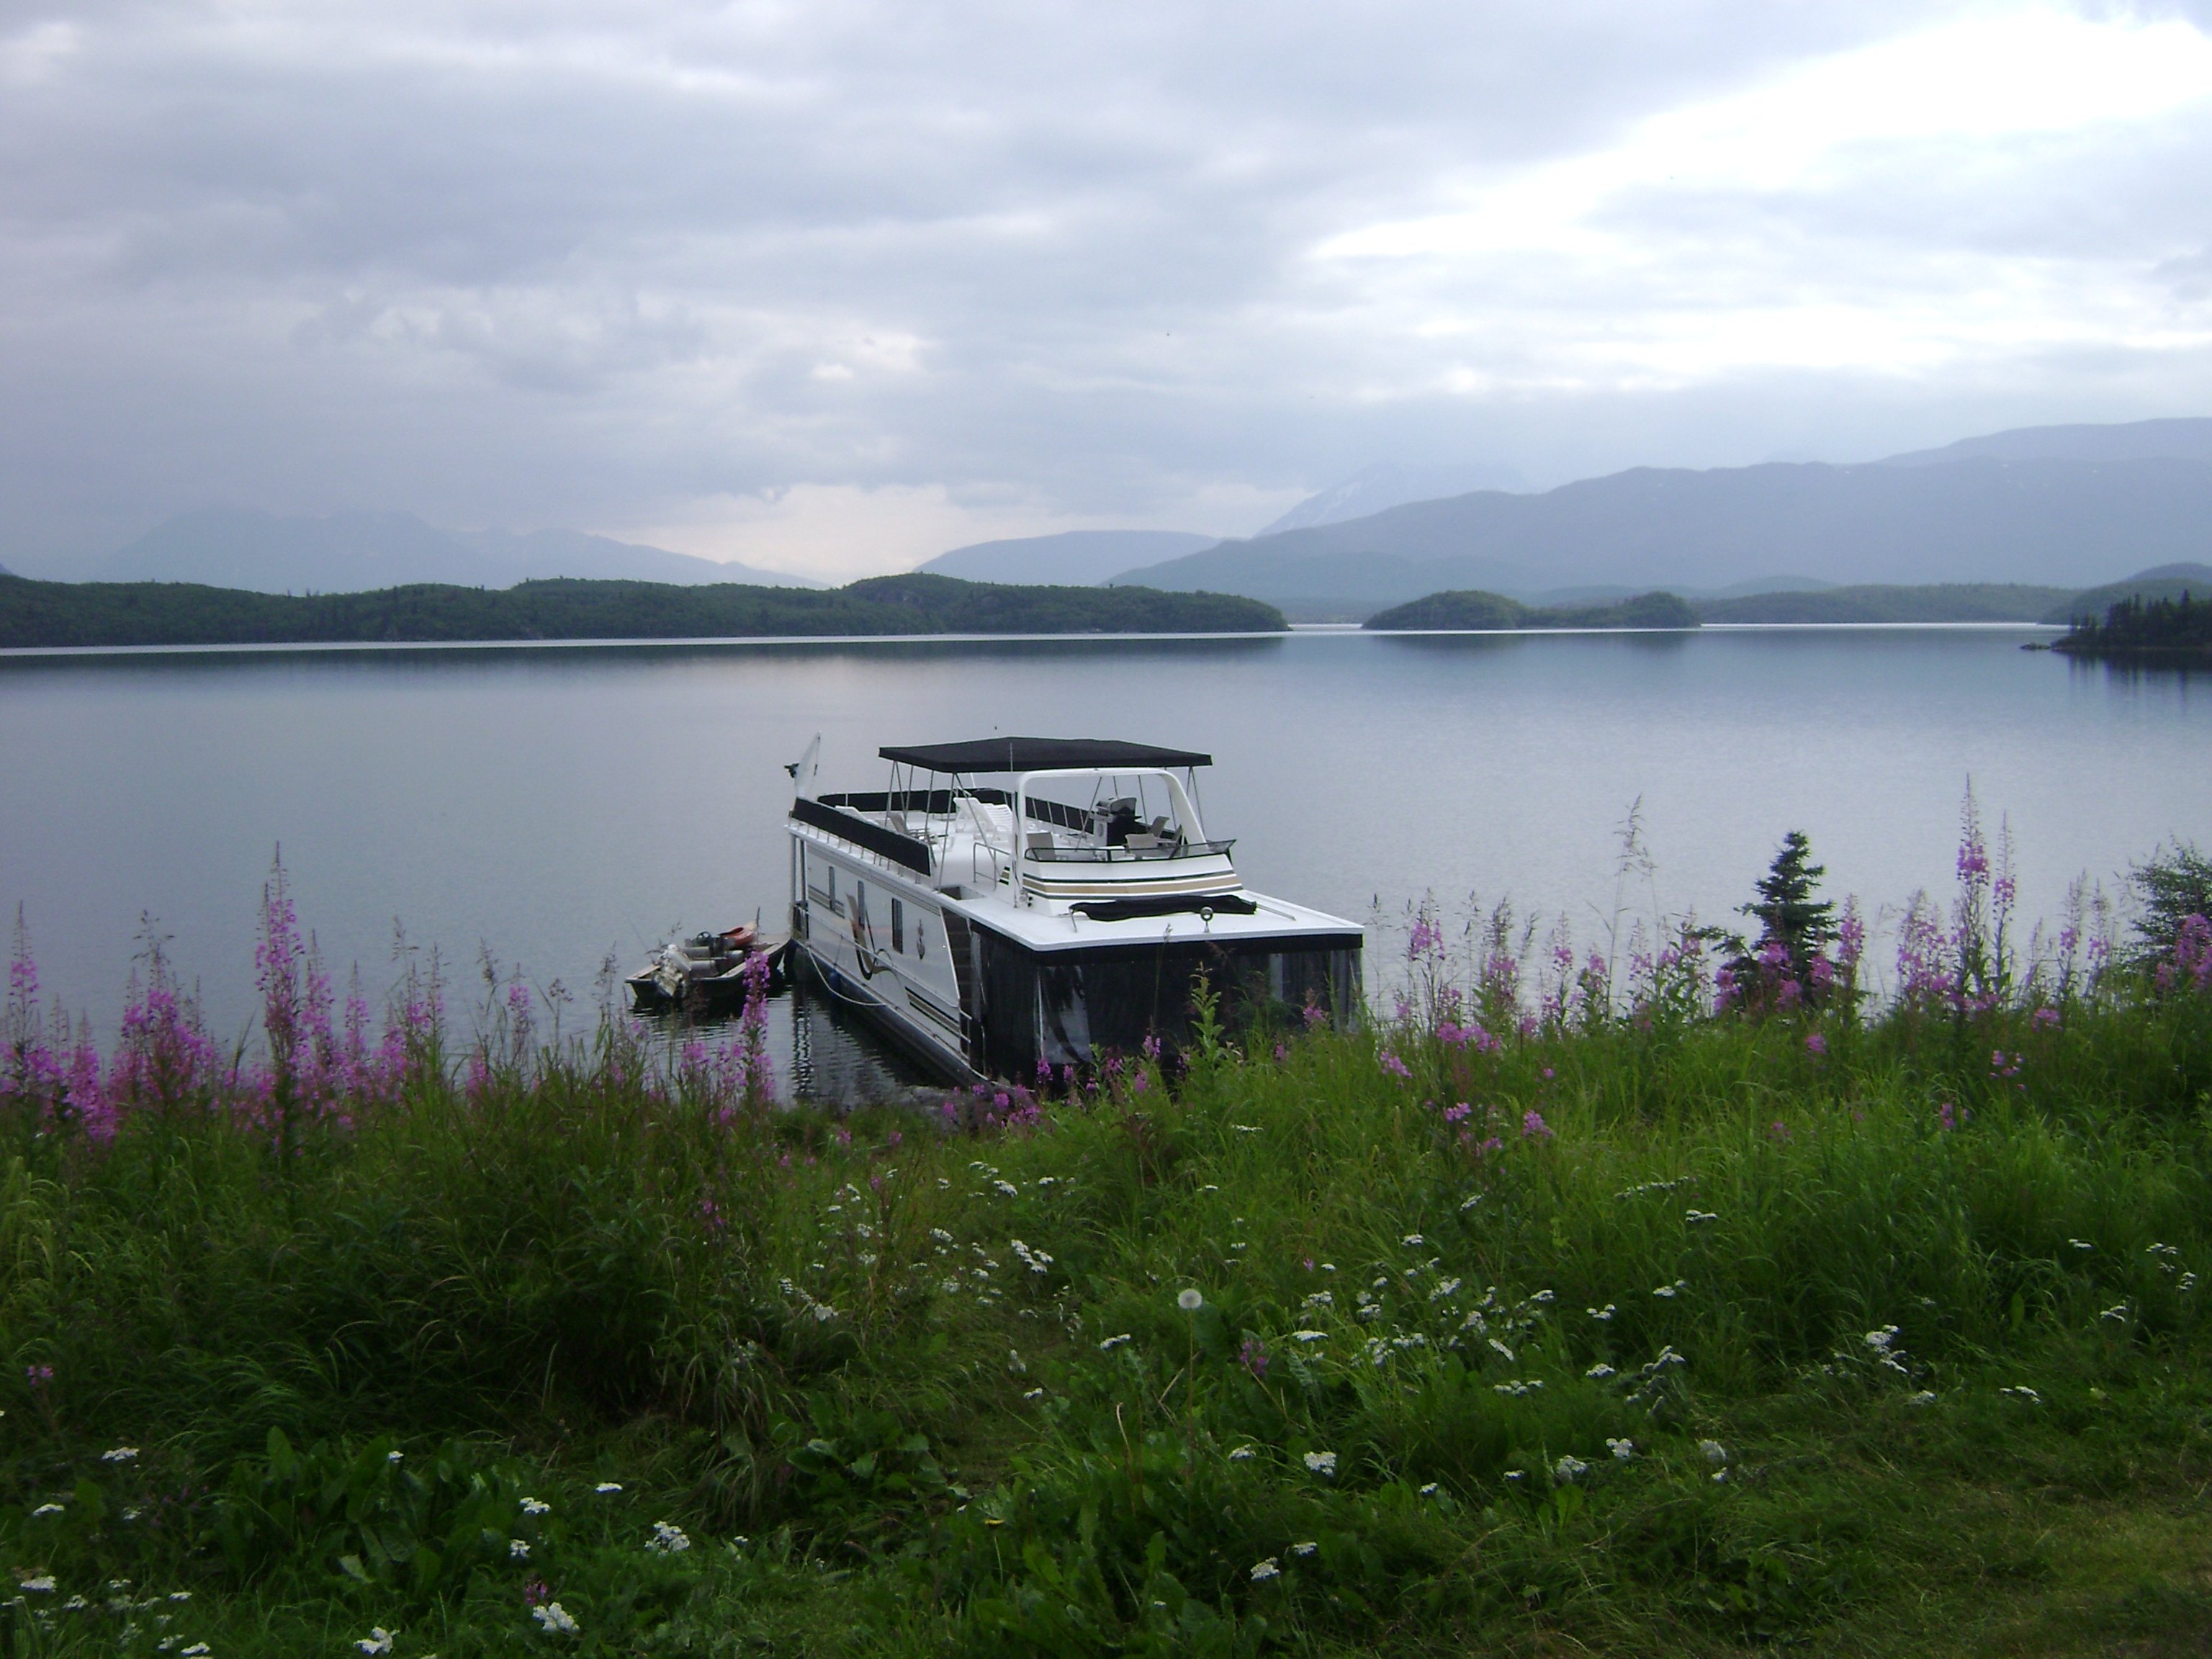 Wild Stardust The Story Of A Houseboat Ending Up In Alaska Houseboat Magazine